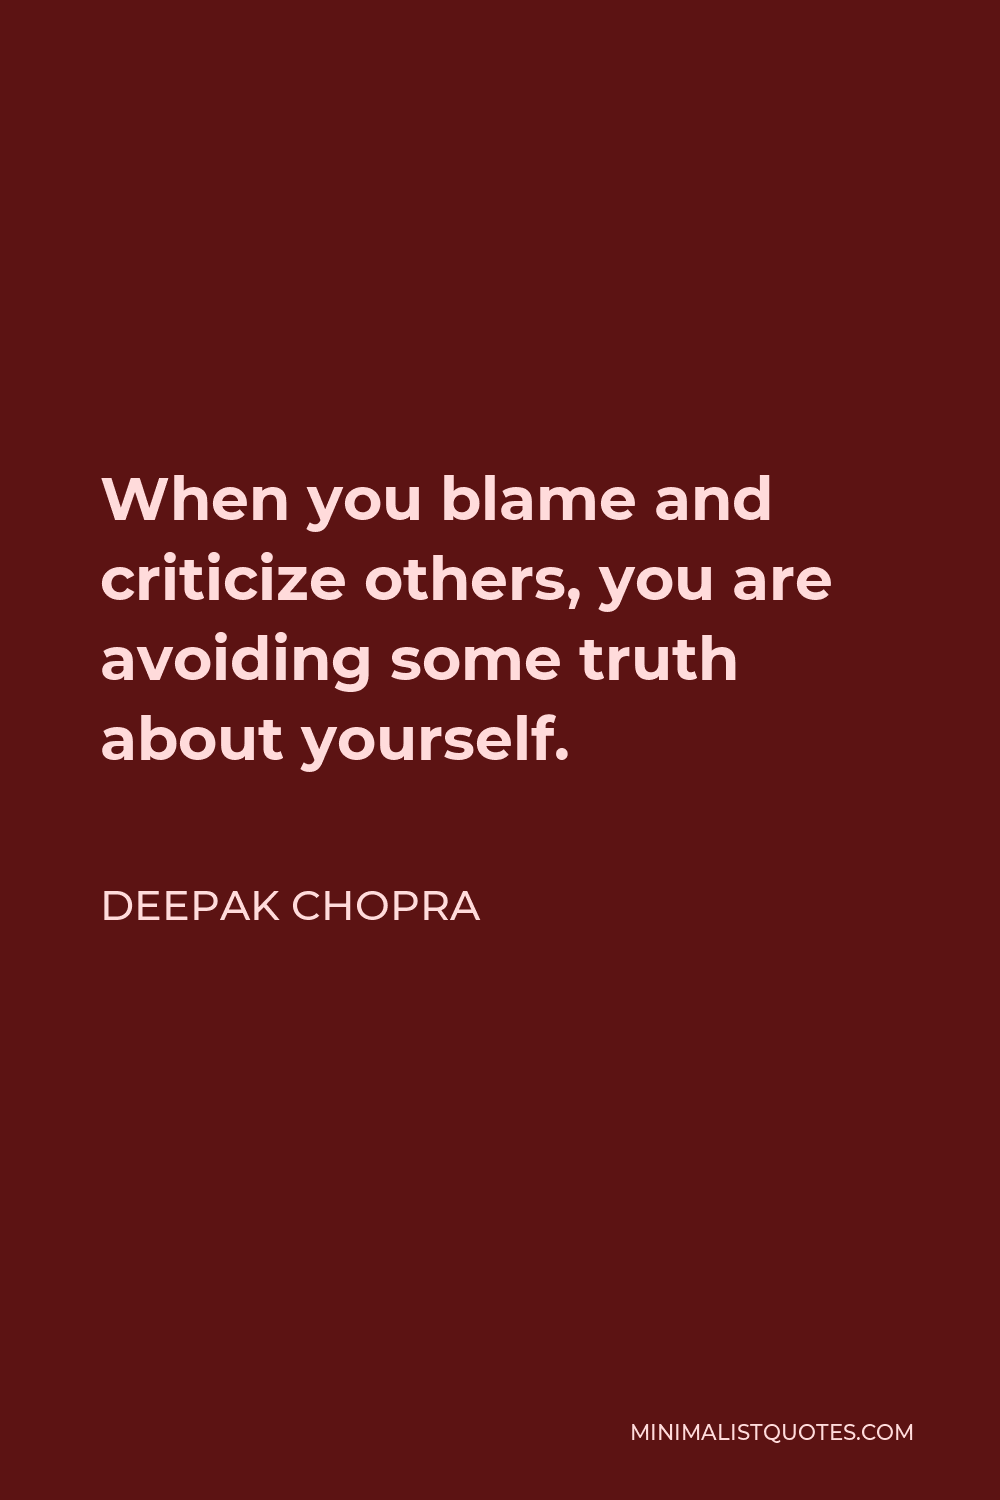 Deepak Chopra Quote - When you blame and criticize others, you are avoiding some truth about yourself.